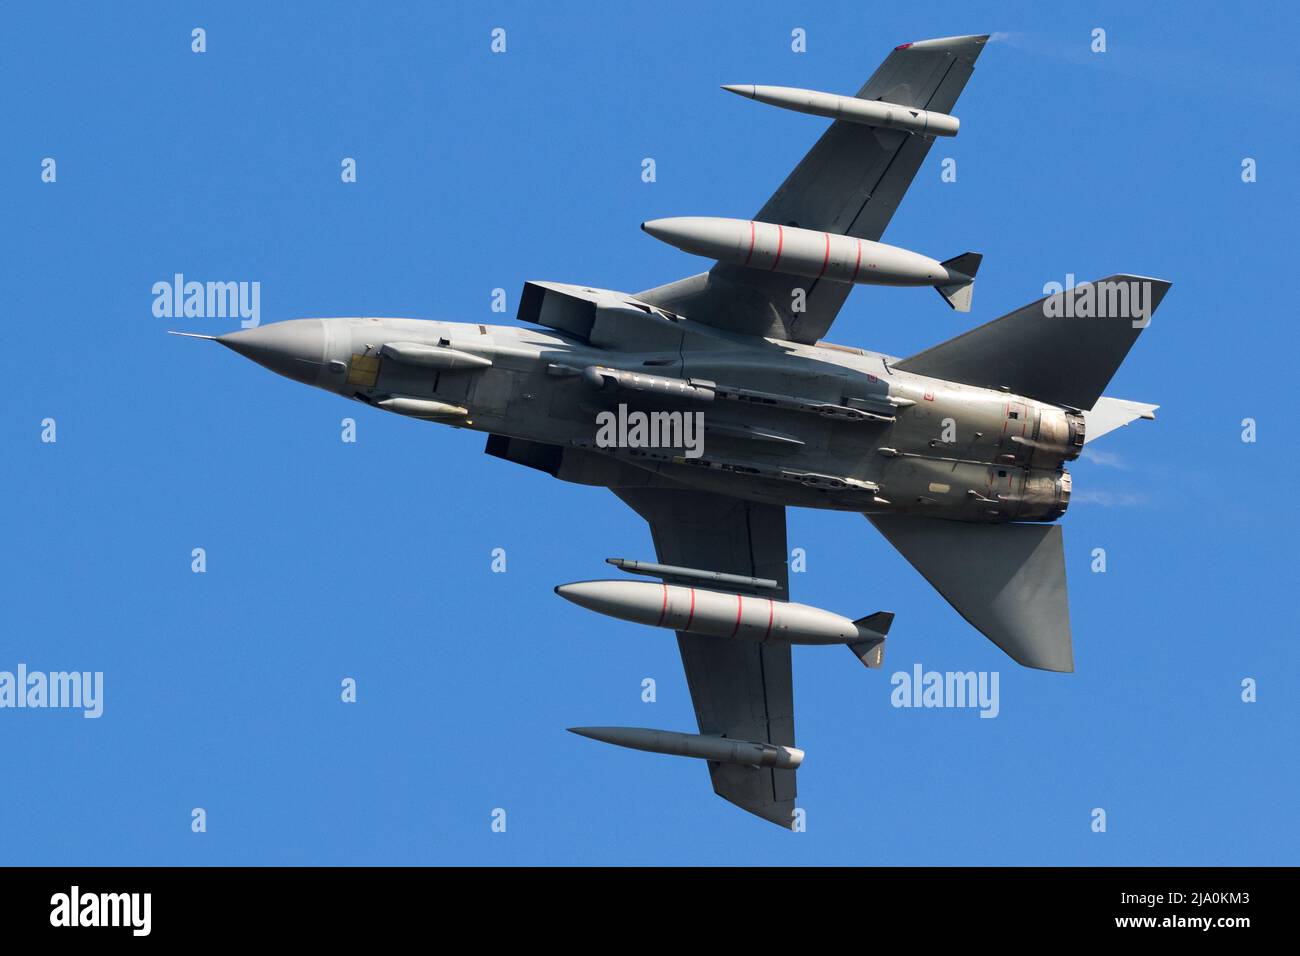 Military air force fighter jet interceptor airplane in full flight. Stock Photo